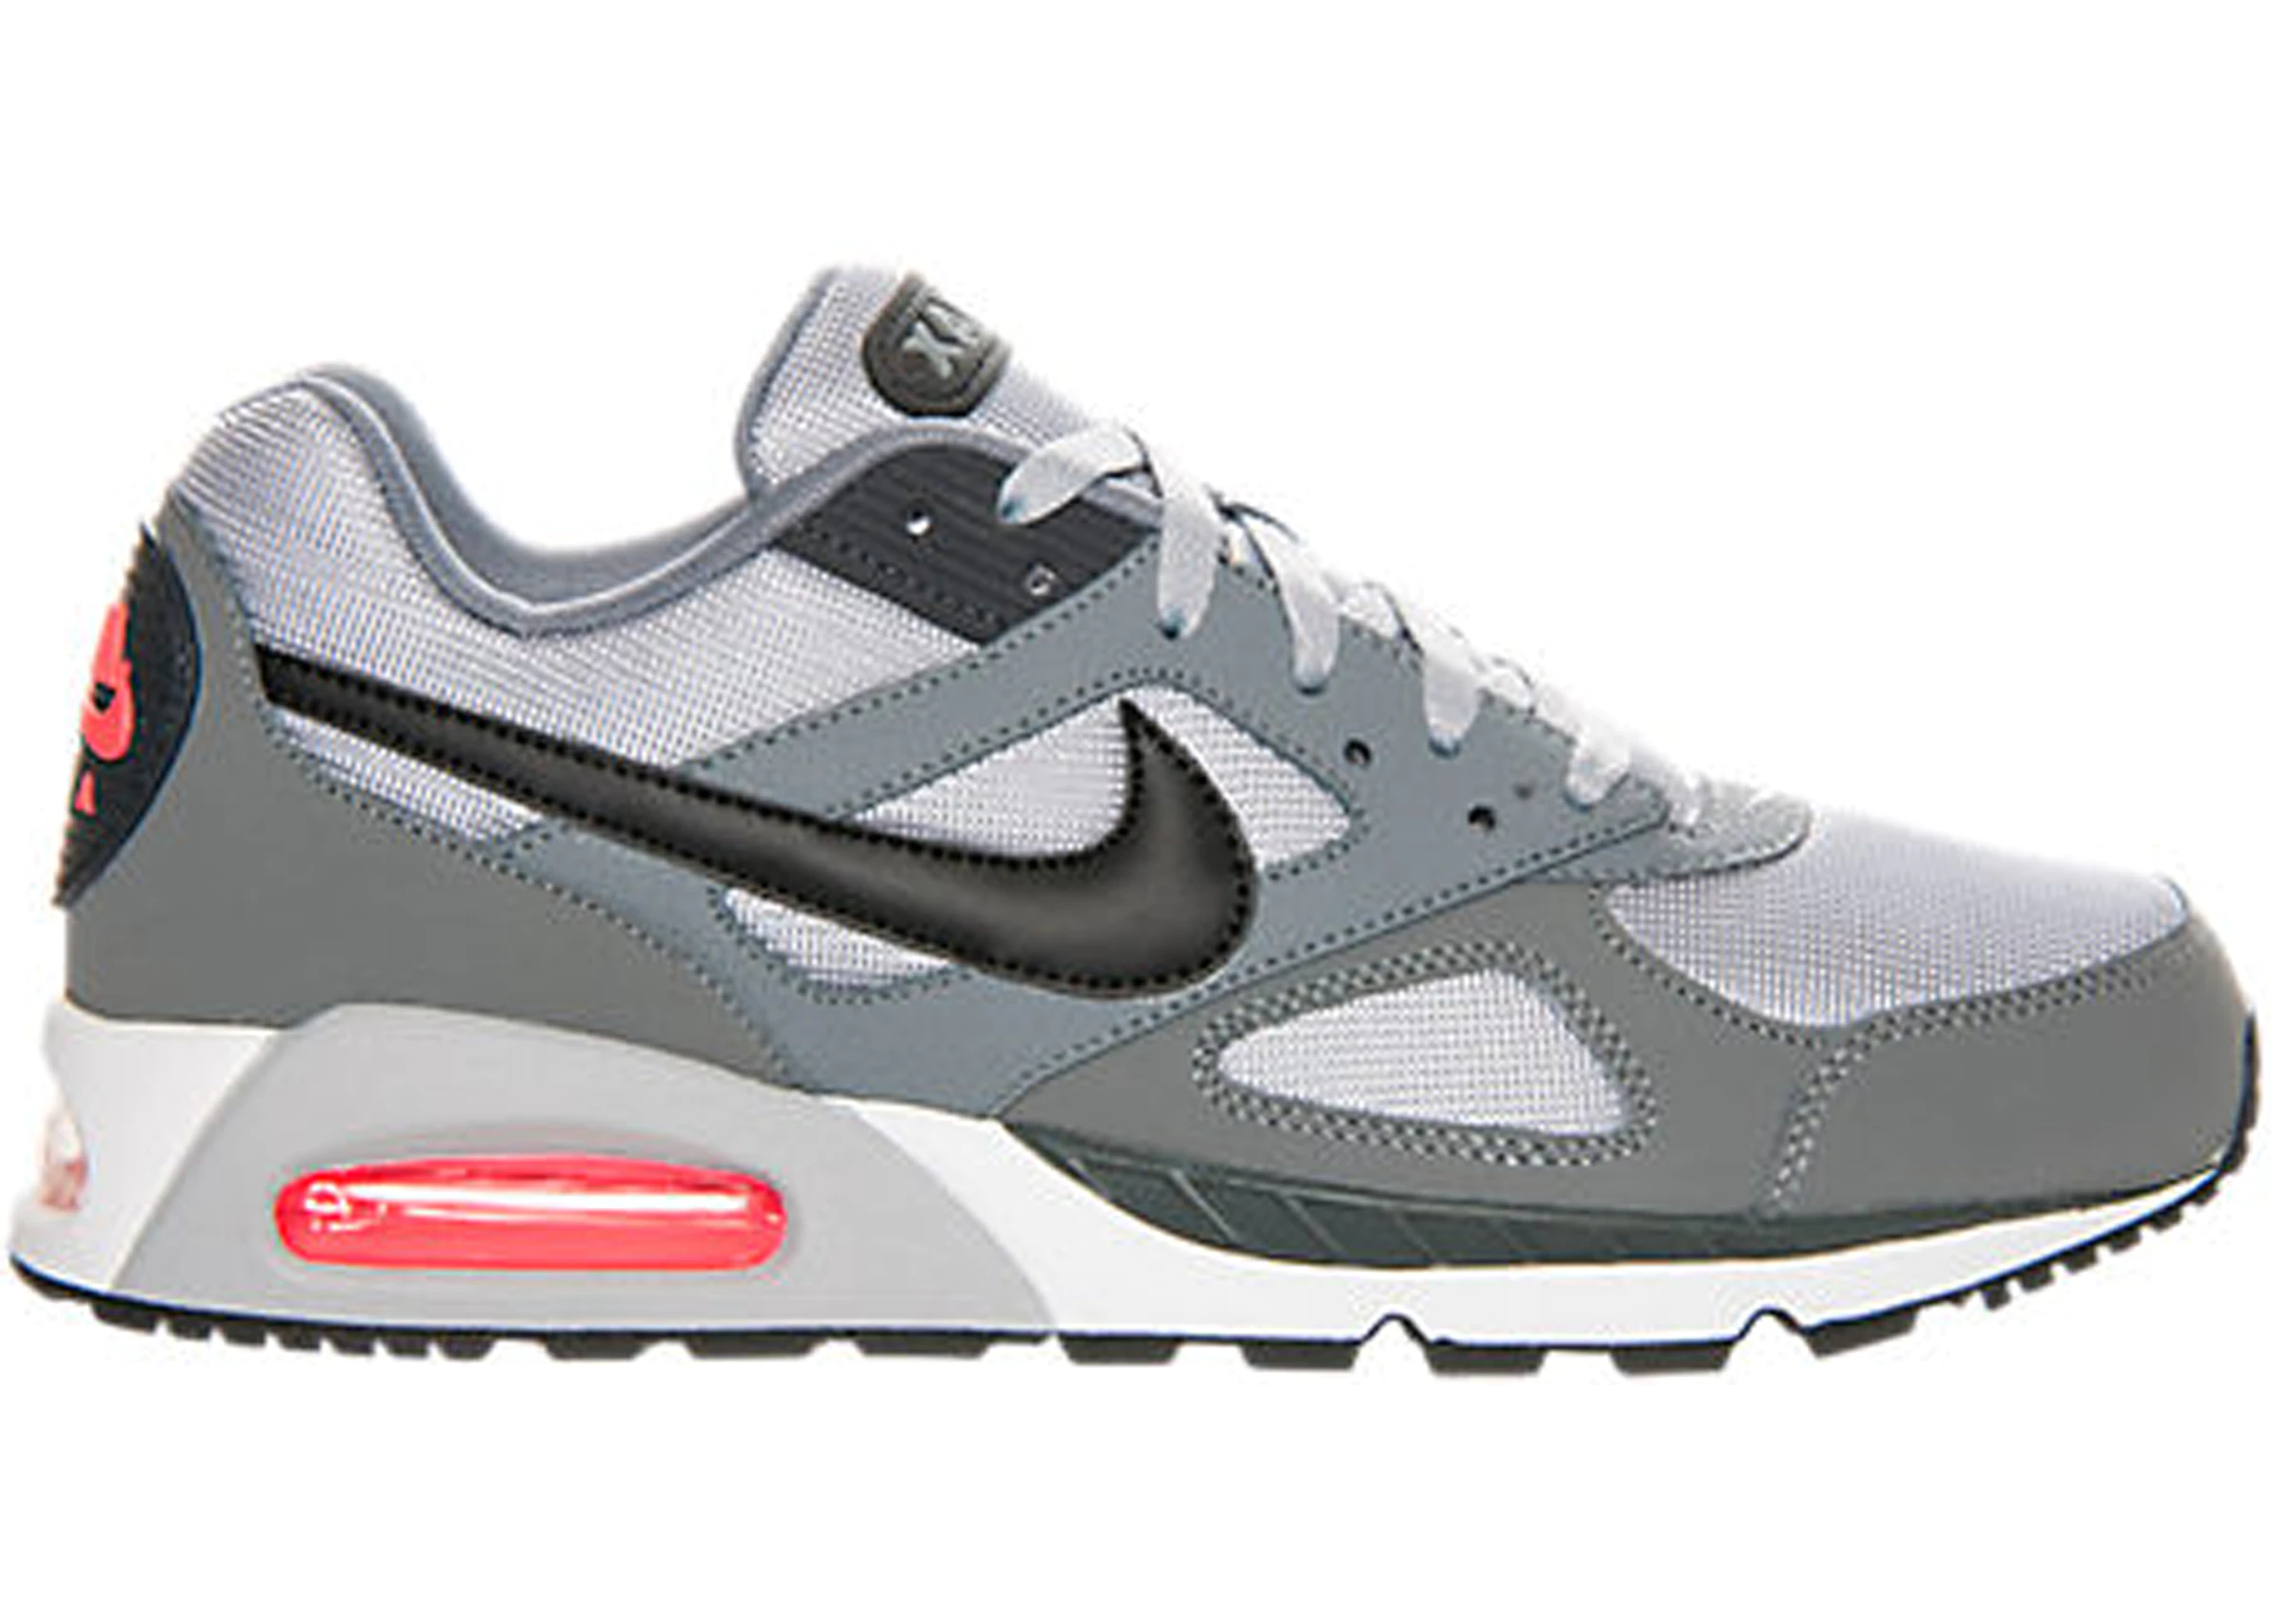 impression approach Cottage Nike Air Max Ivo Wolf Grey - 580518-001 - US